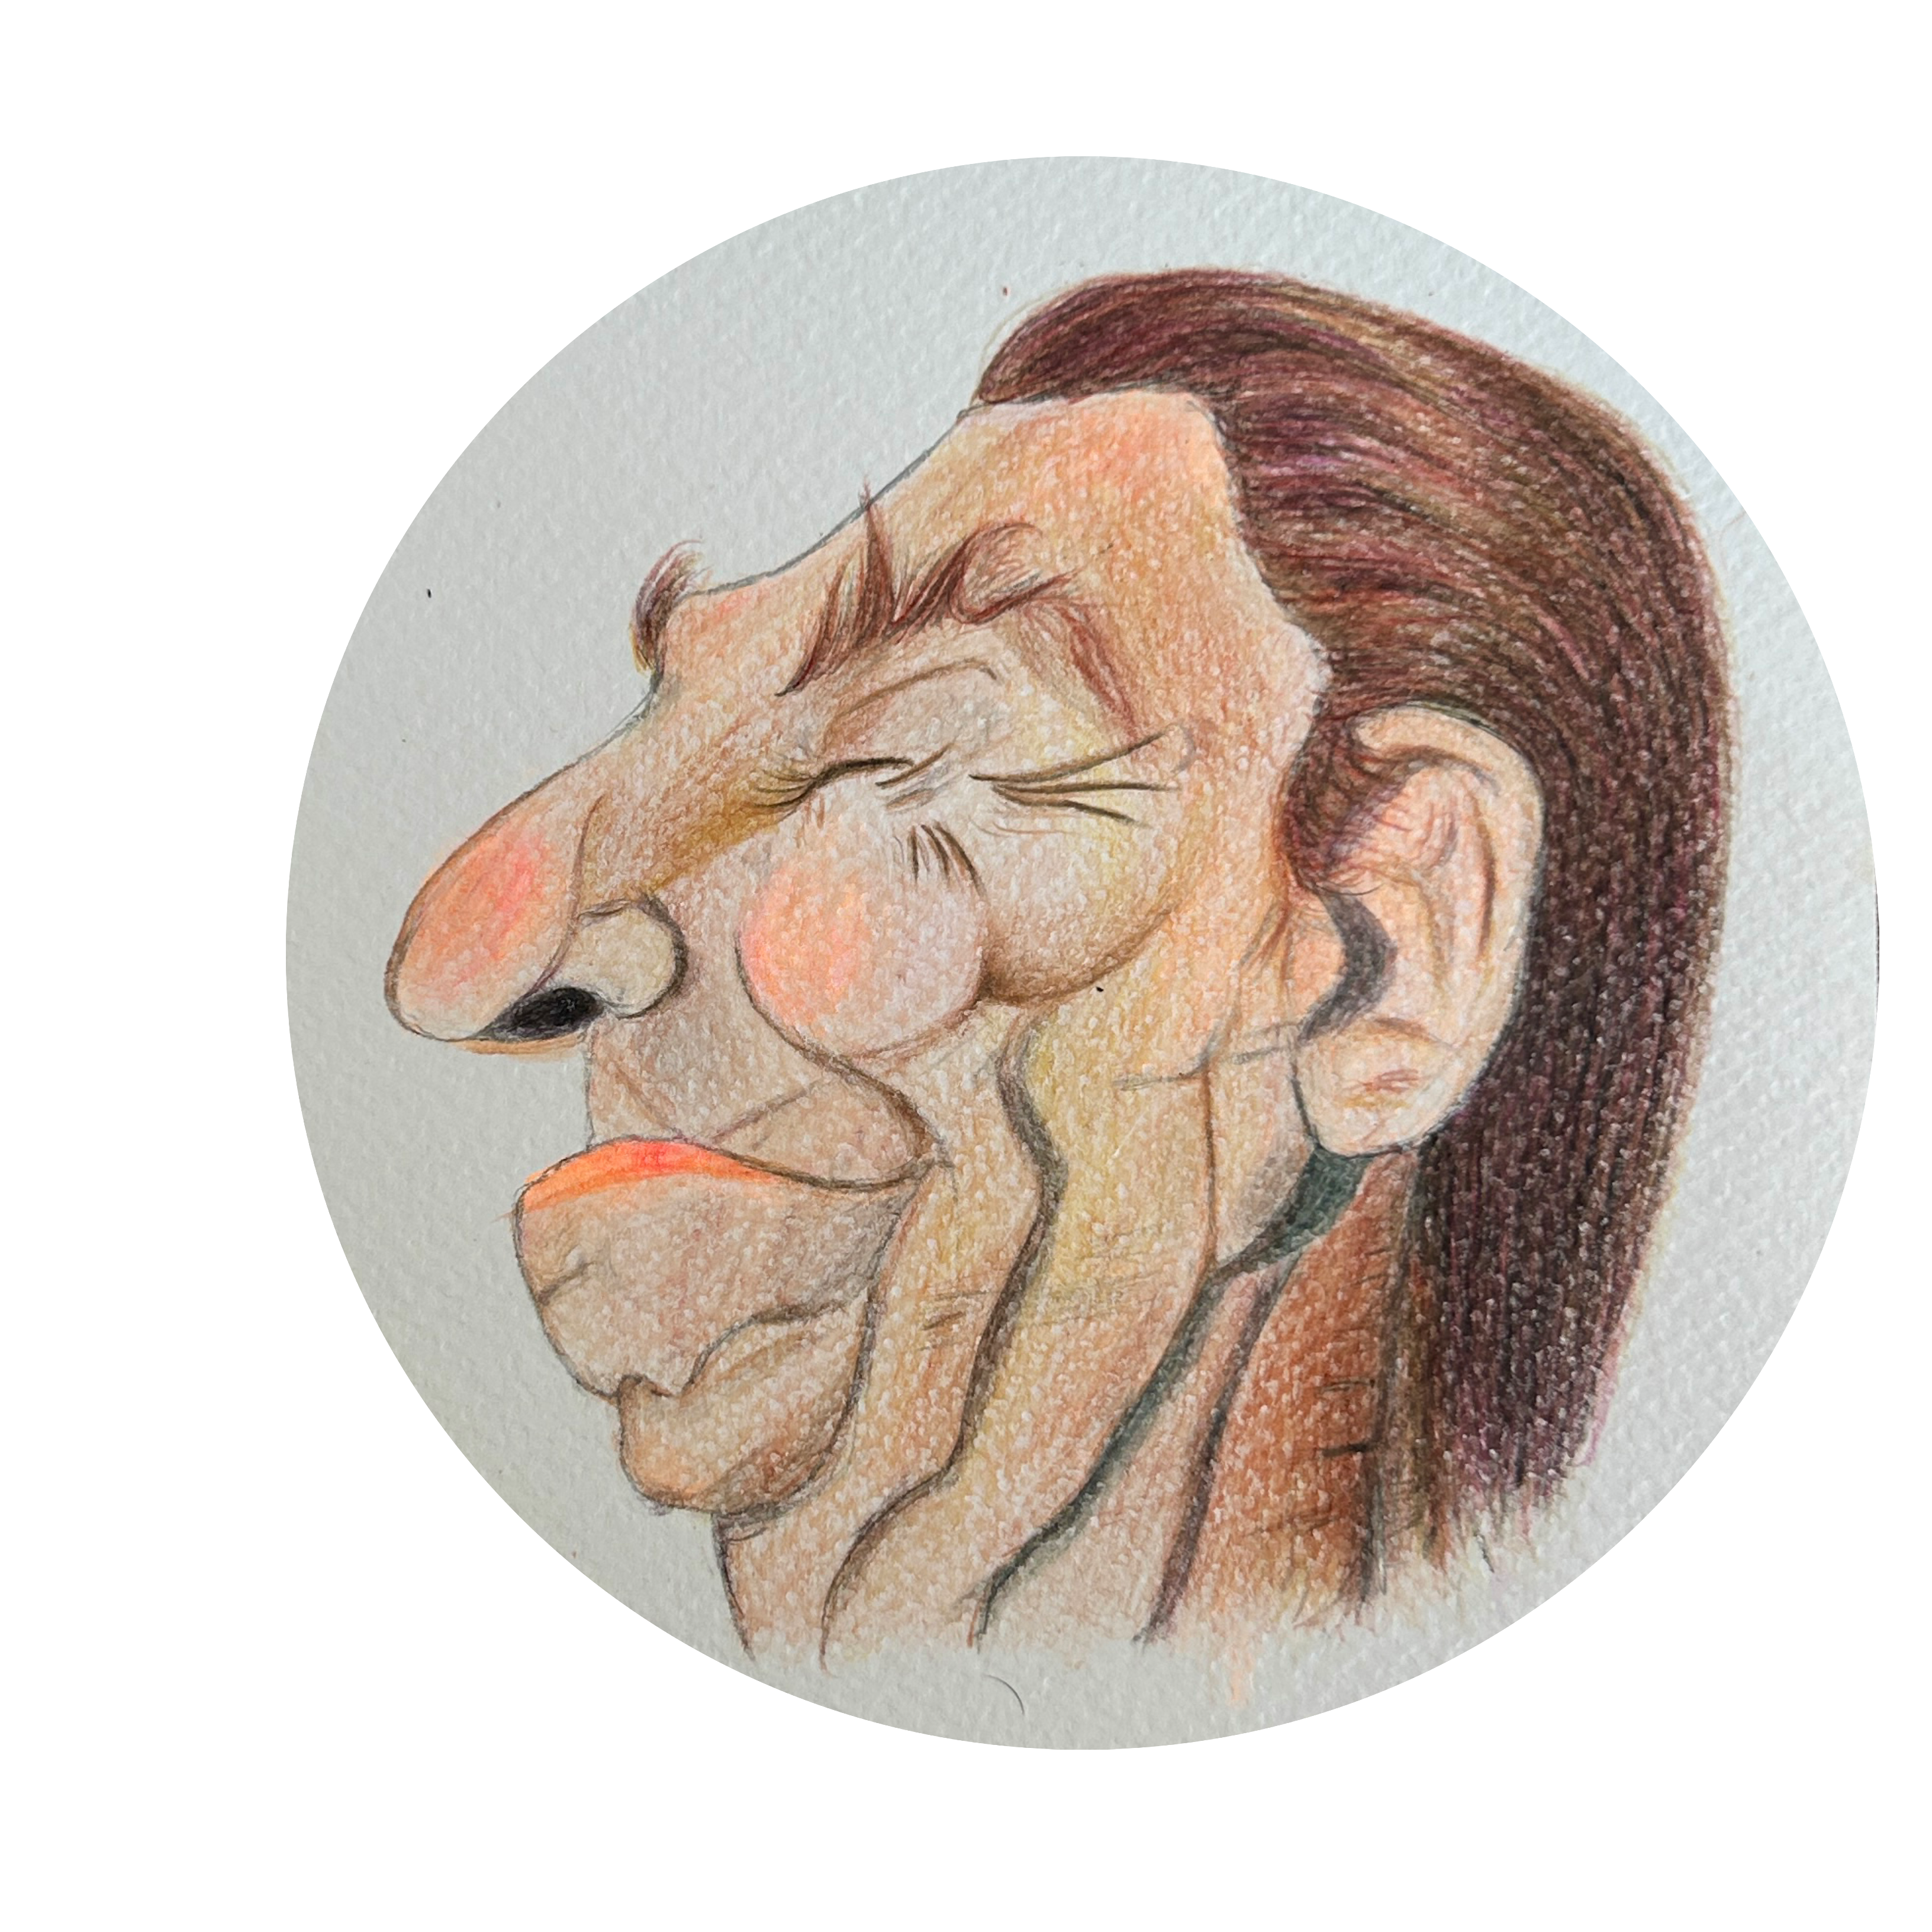 colour pencil drawing of a puppet from the Genesis music video titled 'Land of Confusion